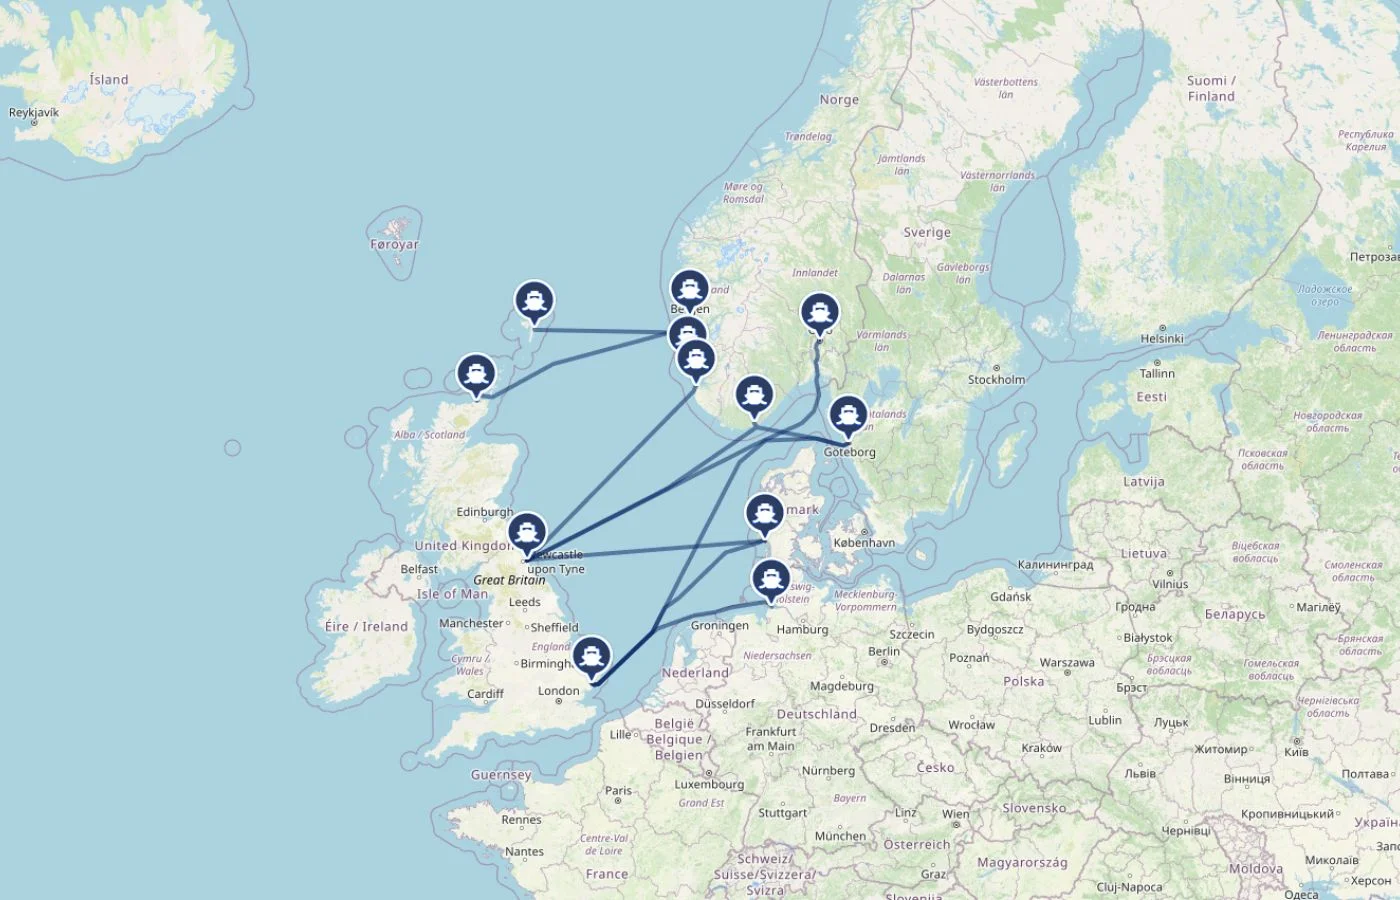 Historic ferries from the UK to Scandinavia, Norway, Sweden and Denmark